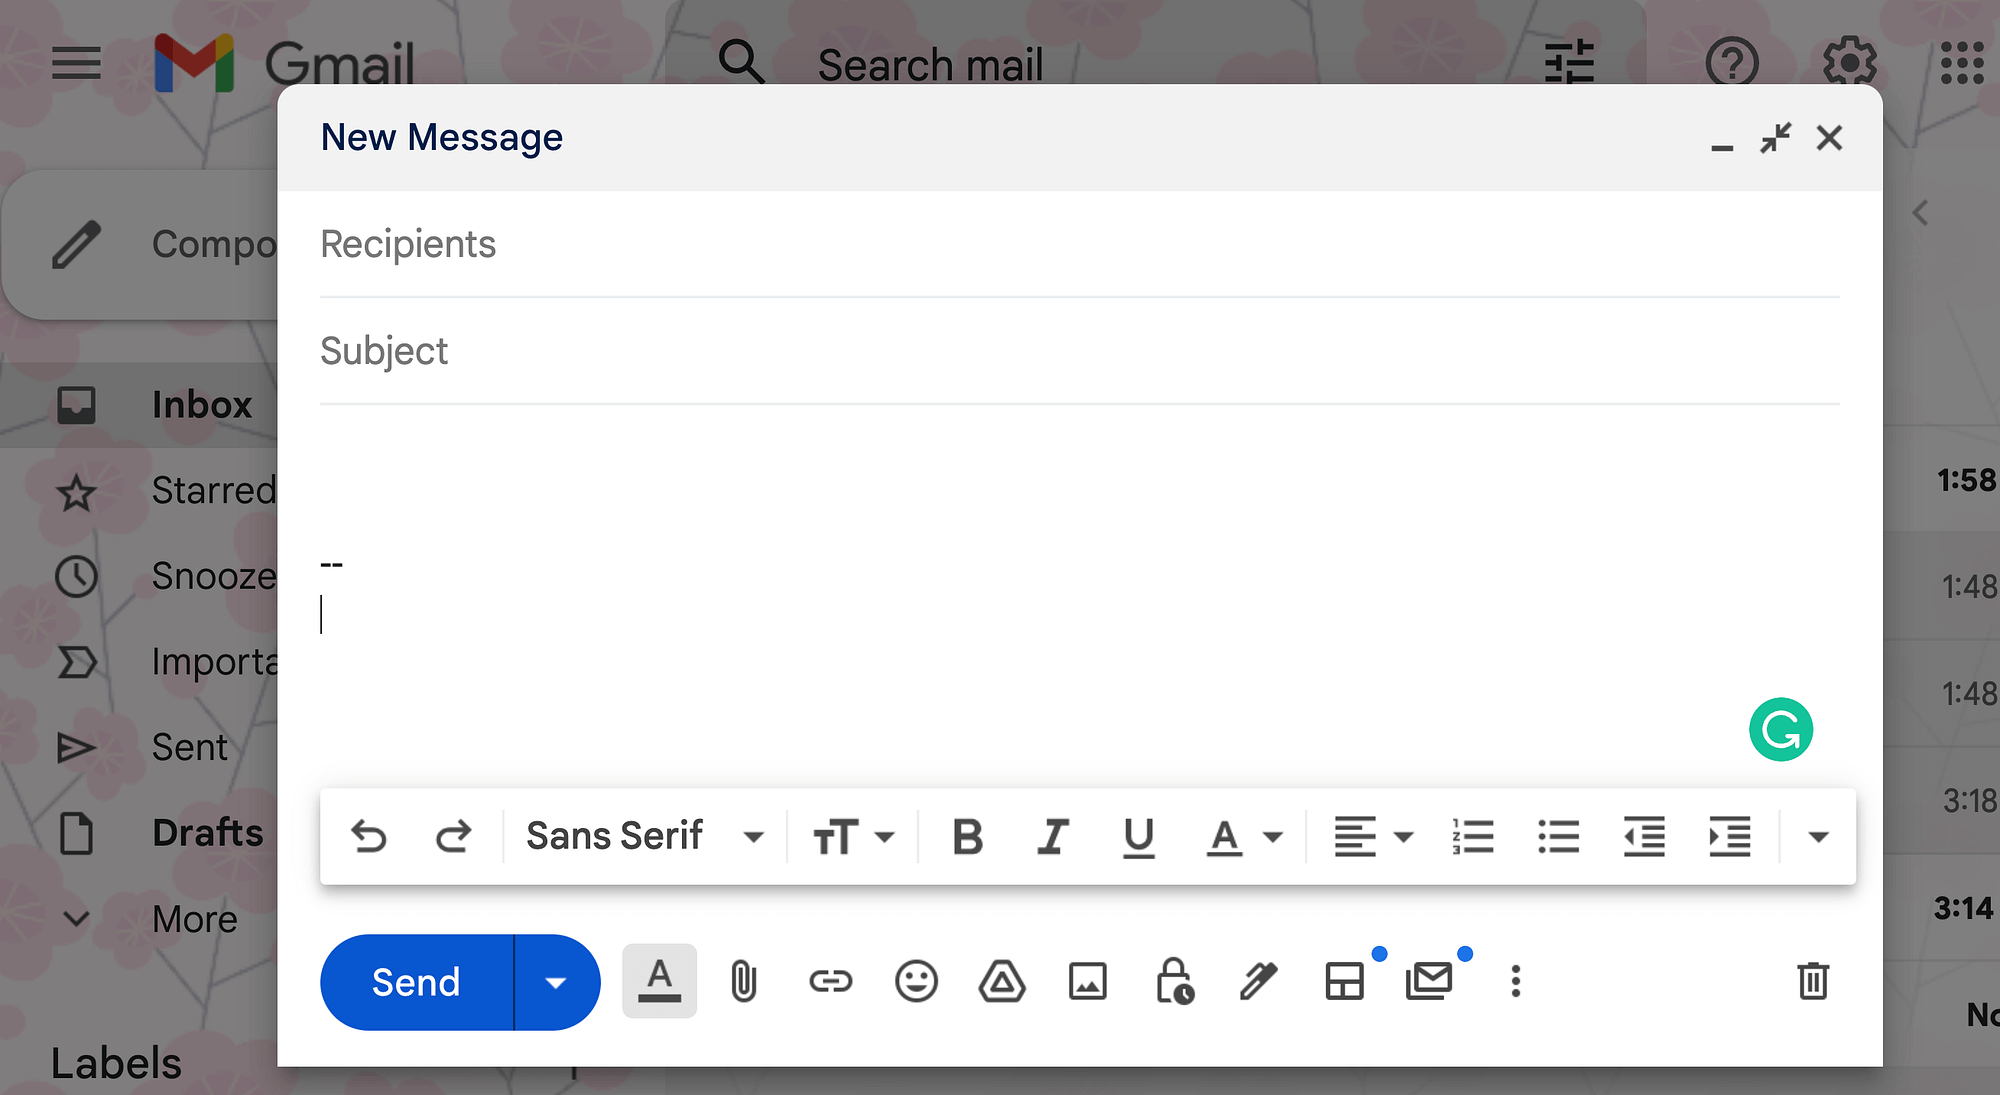 Composing an email in Gmail.